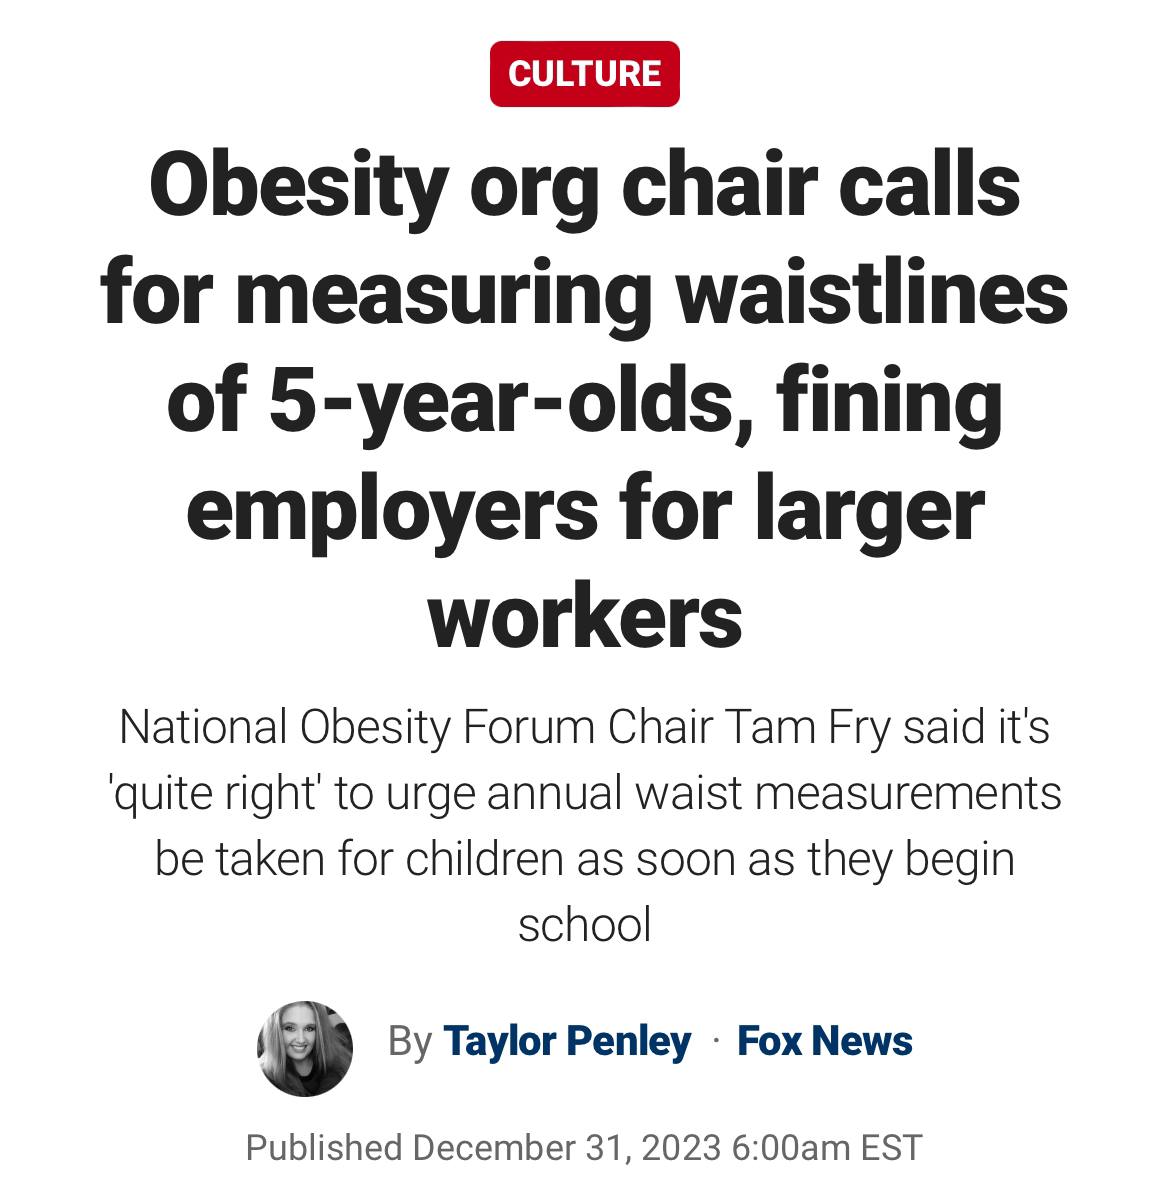 Obesity org chair calls for measuring waistlines of 5-year-olds, fining  employers for larger workers